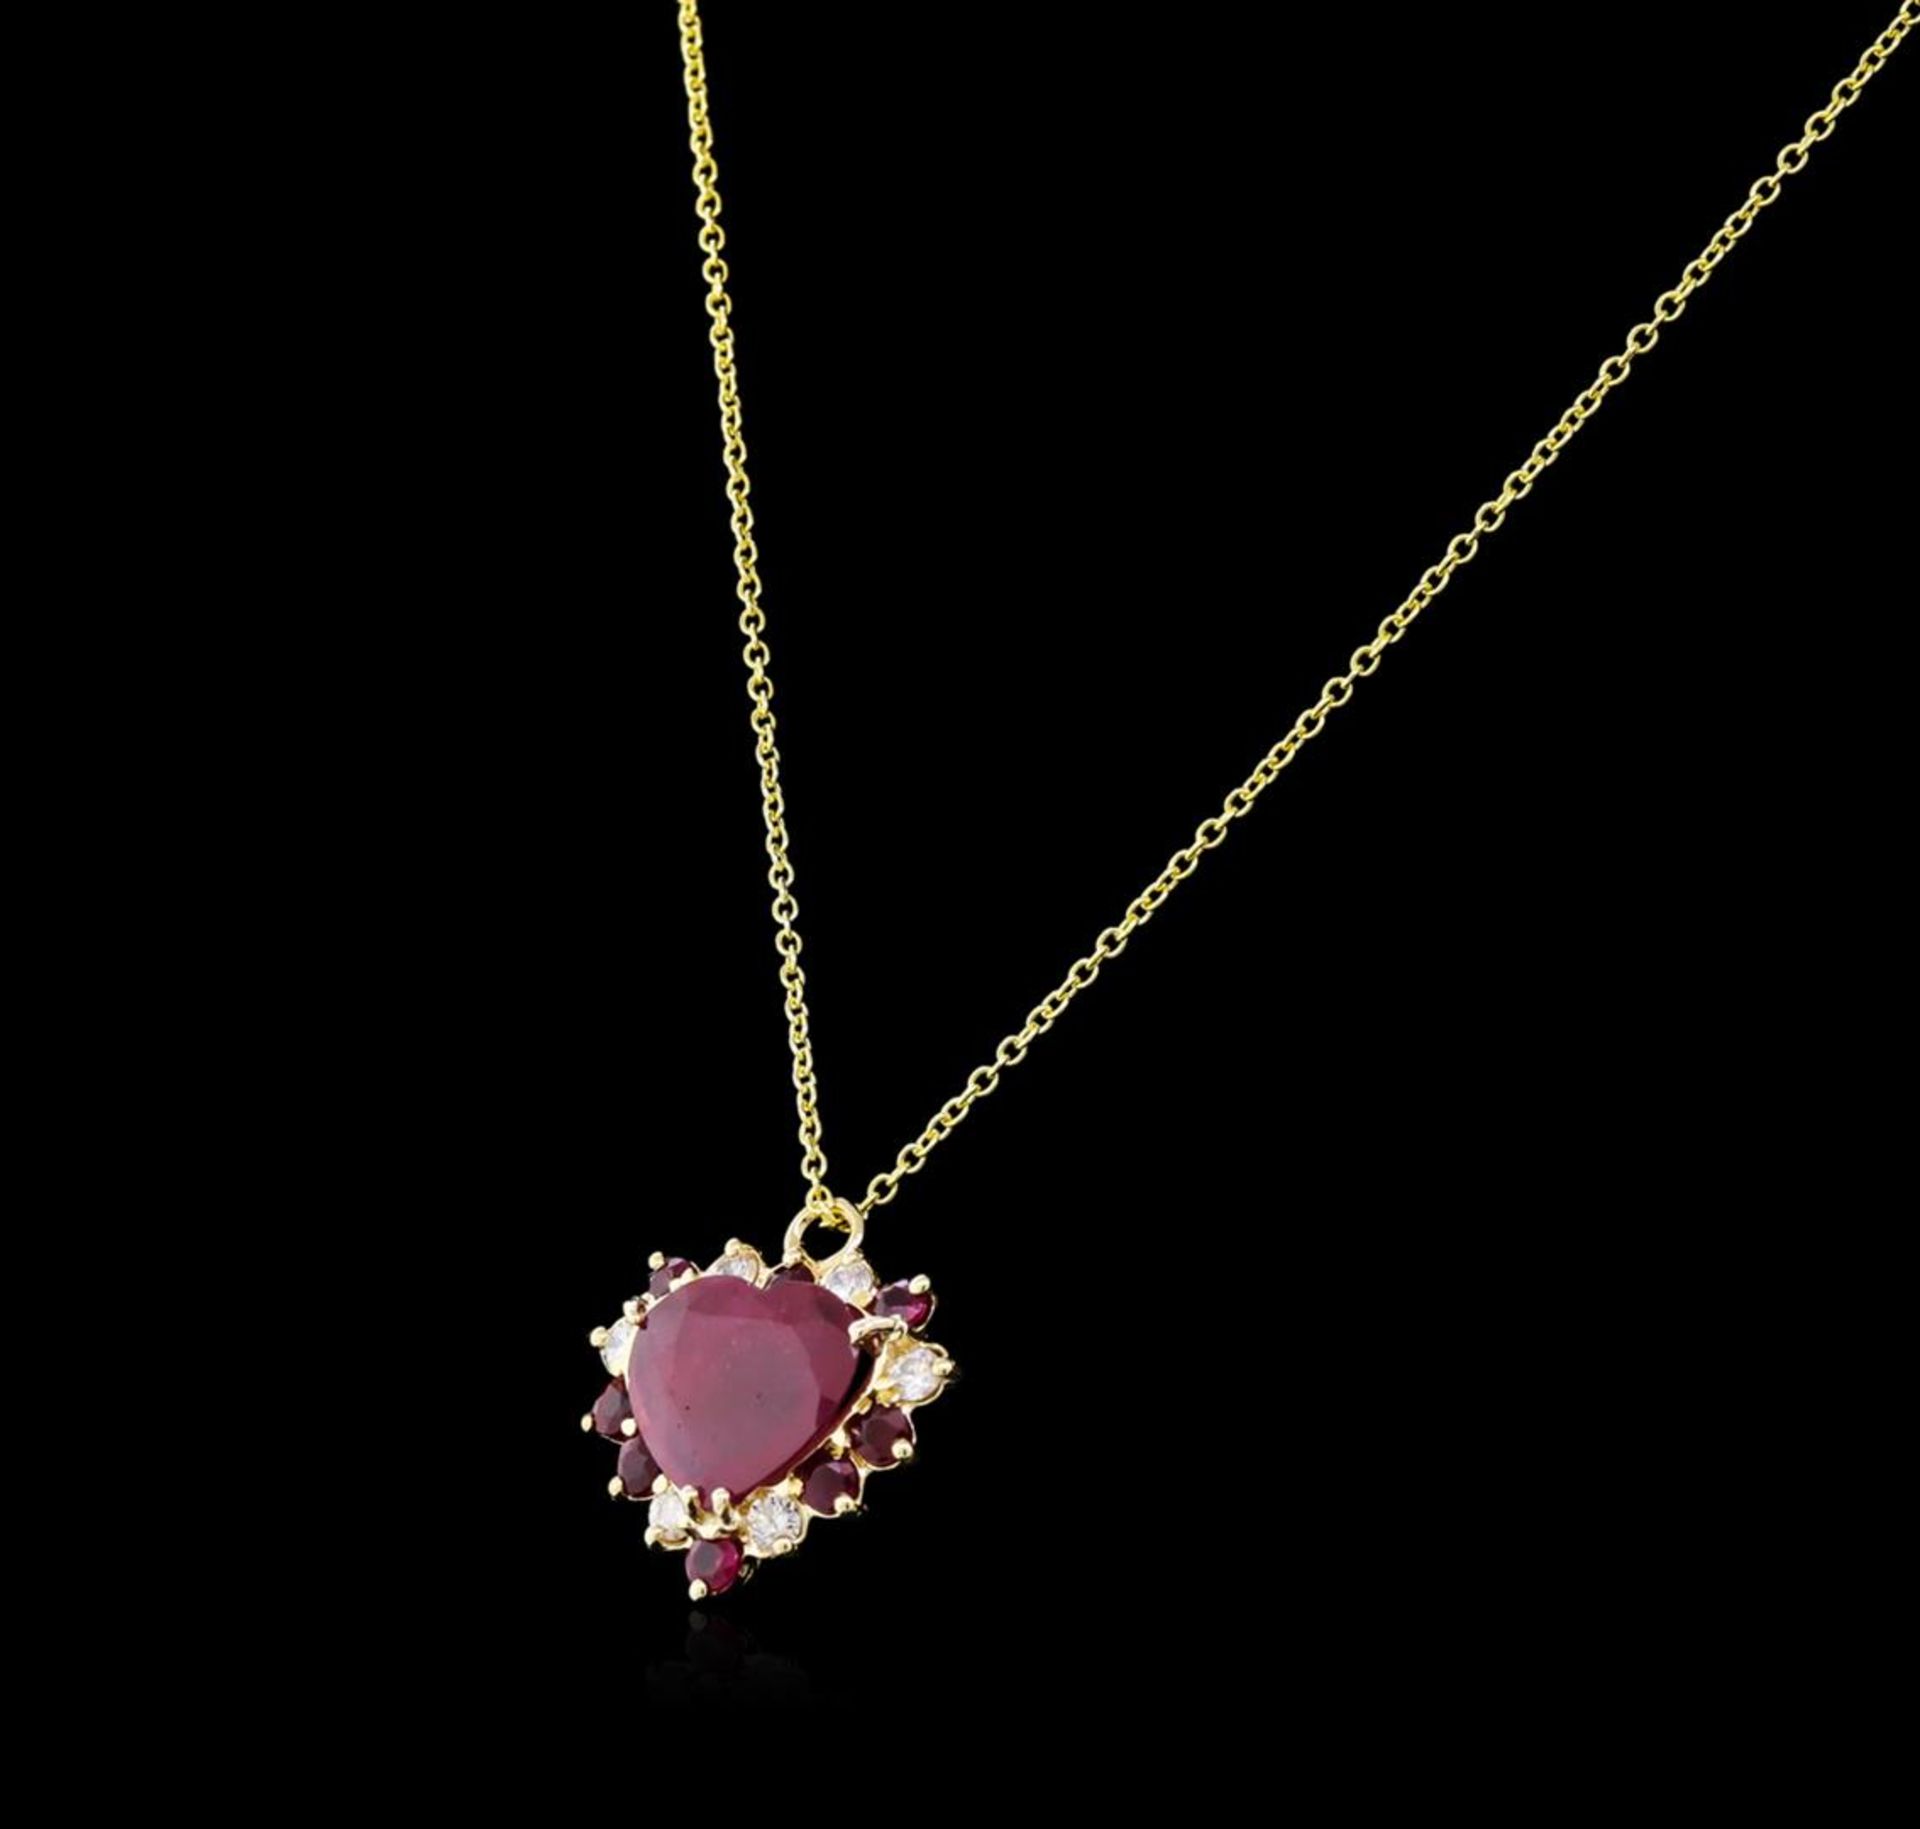 5.29 ctw Ruby and Diamond Pendant - 14KT Yellow Gold - Image 2 of 3